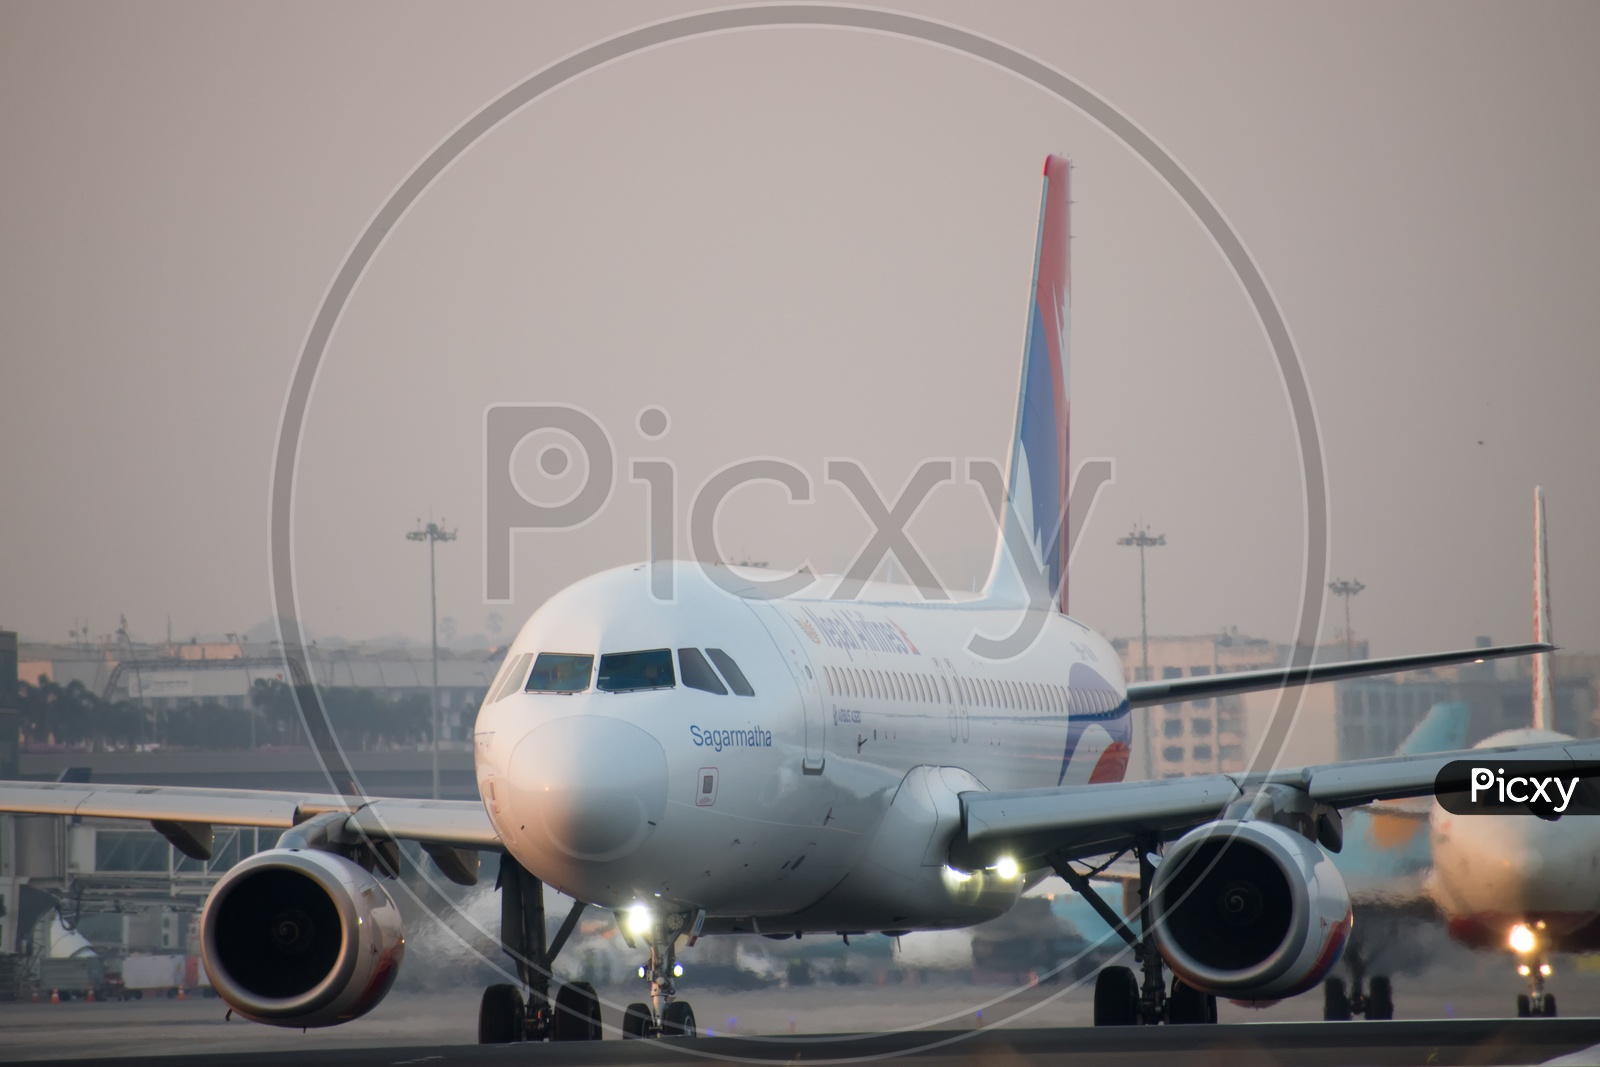 Nepal Airlines A320